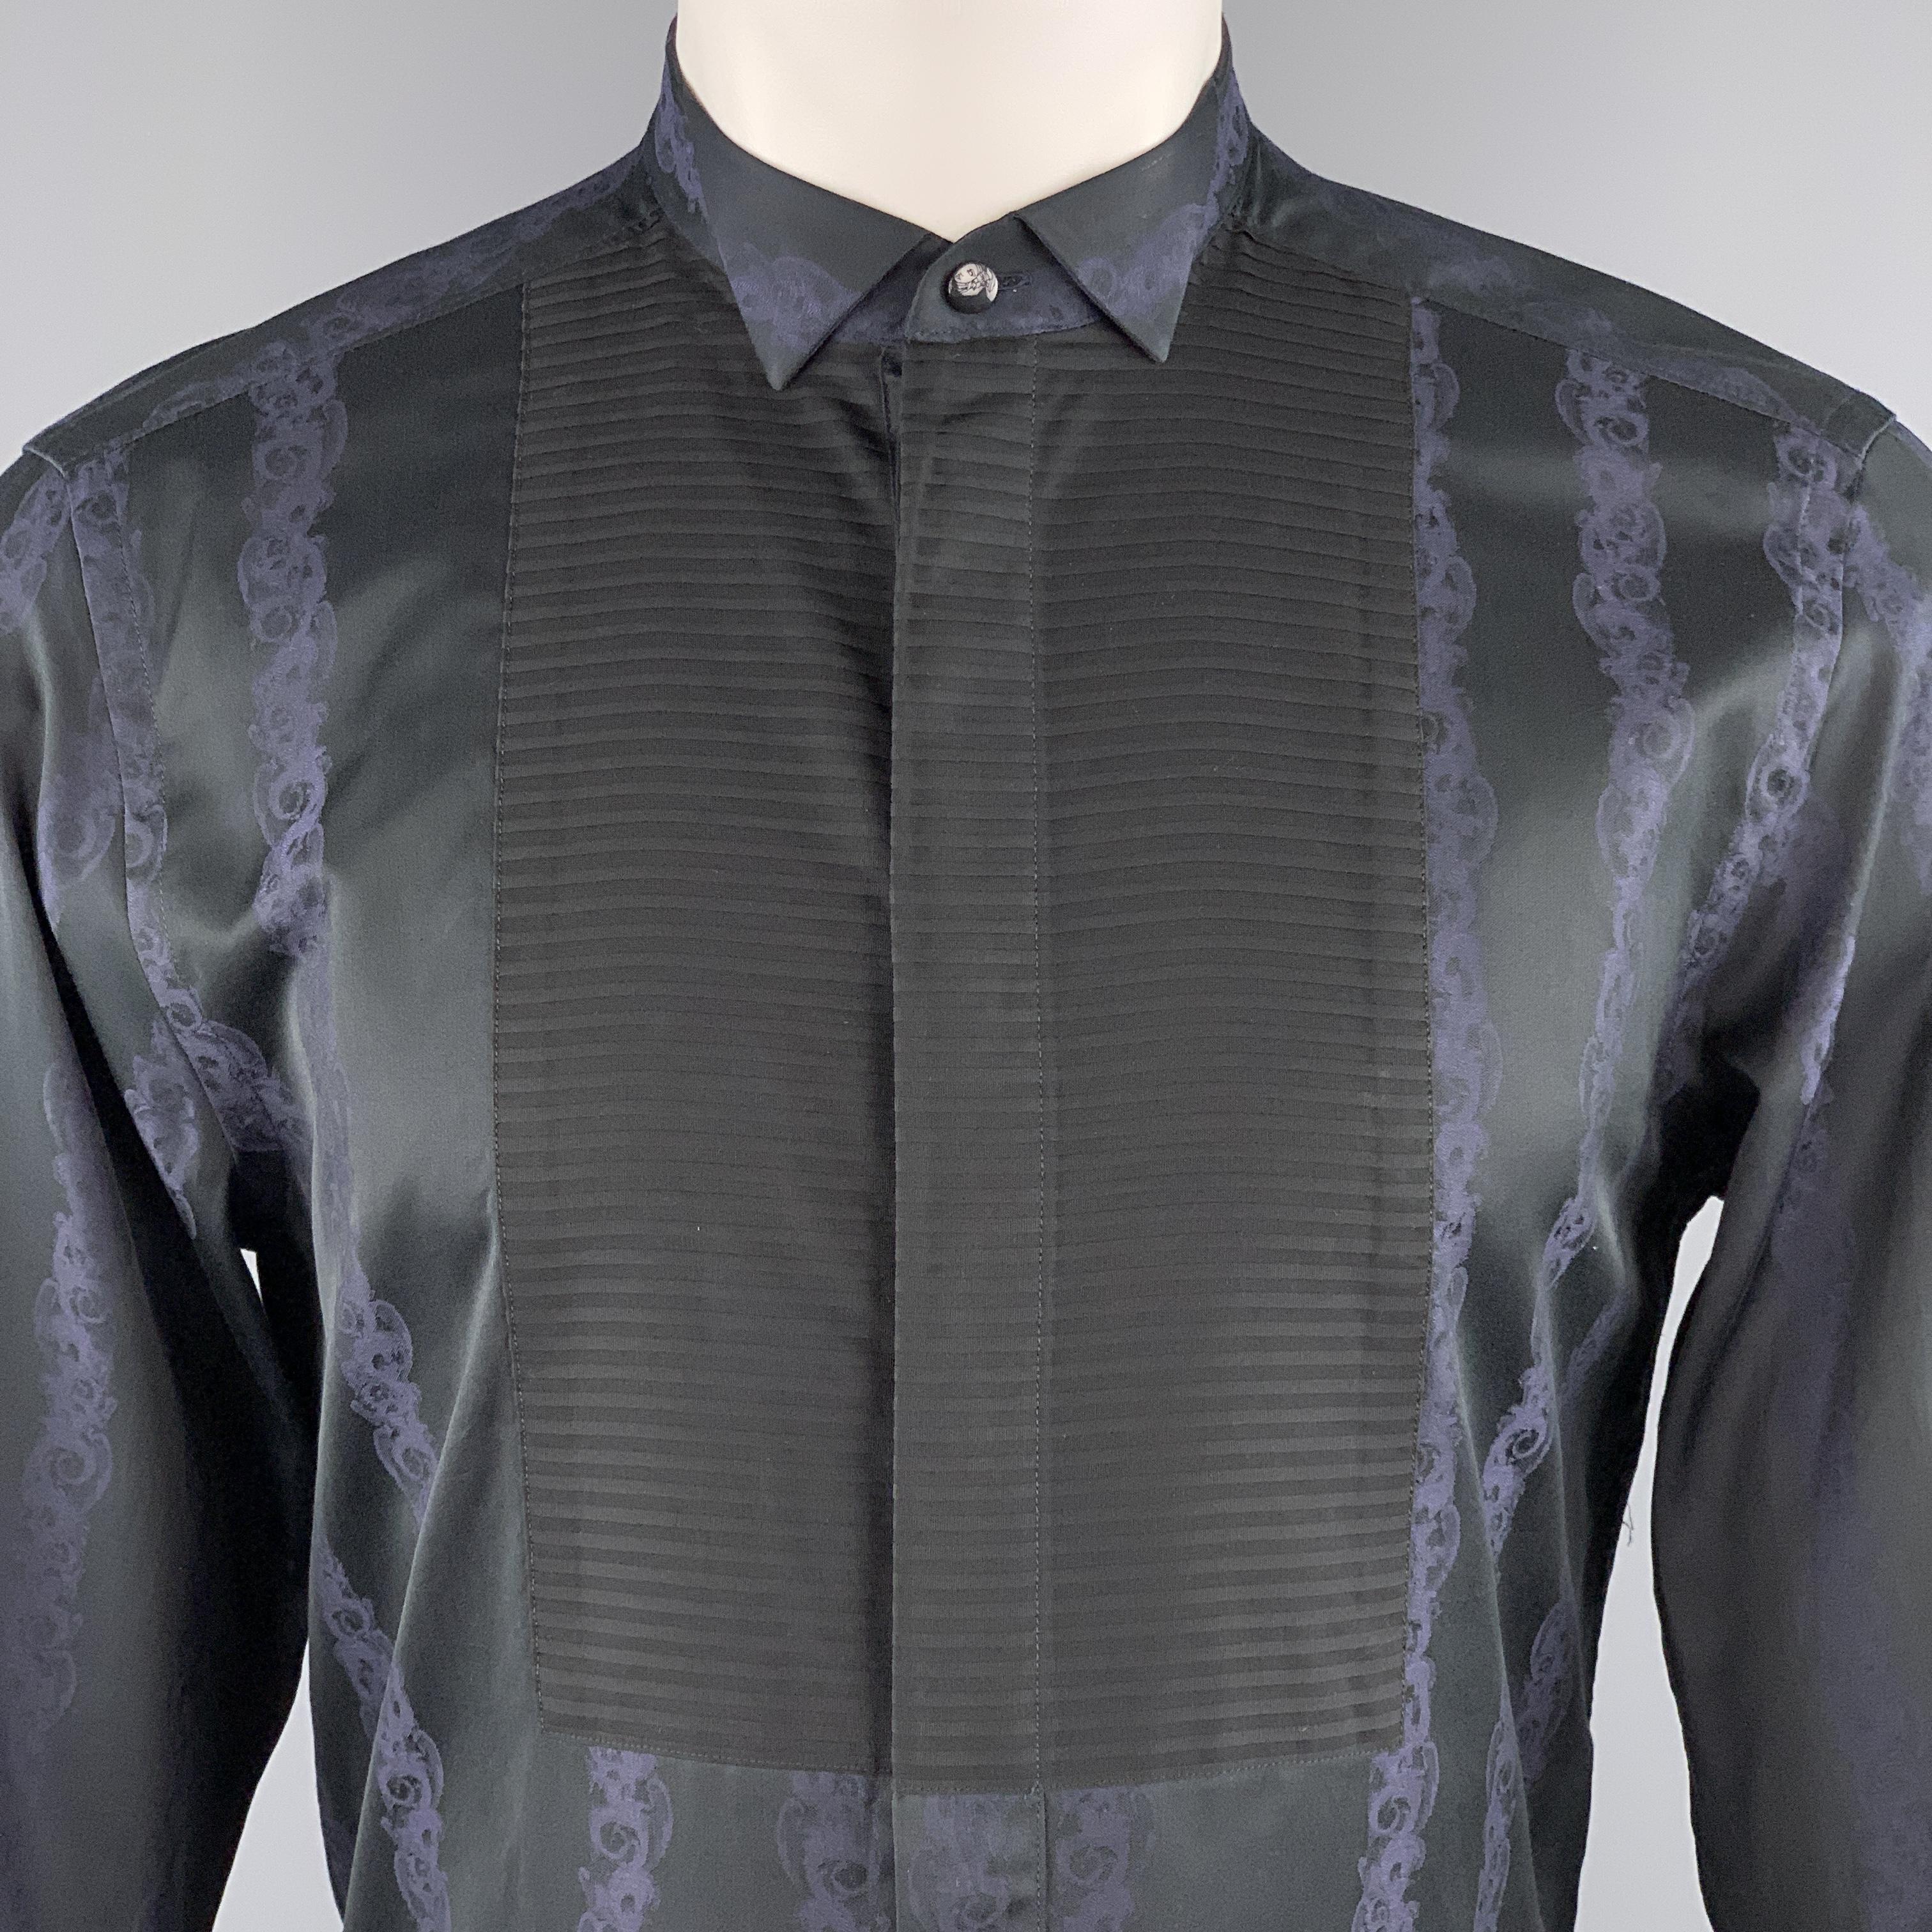 VERSACE COLLECTION tuxedo shirt comes in black and navy stripe print cotton with a hidden placket button up front, pleated bib panel, and stand up collar. 

Excellent Pre-Owned Condition.
Marked: 15 1/4  40

Measurements:

Shoulder: 16.5 in.
Chest: